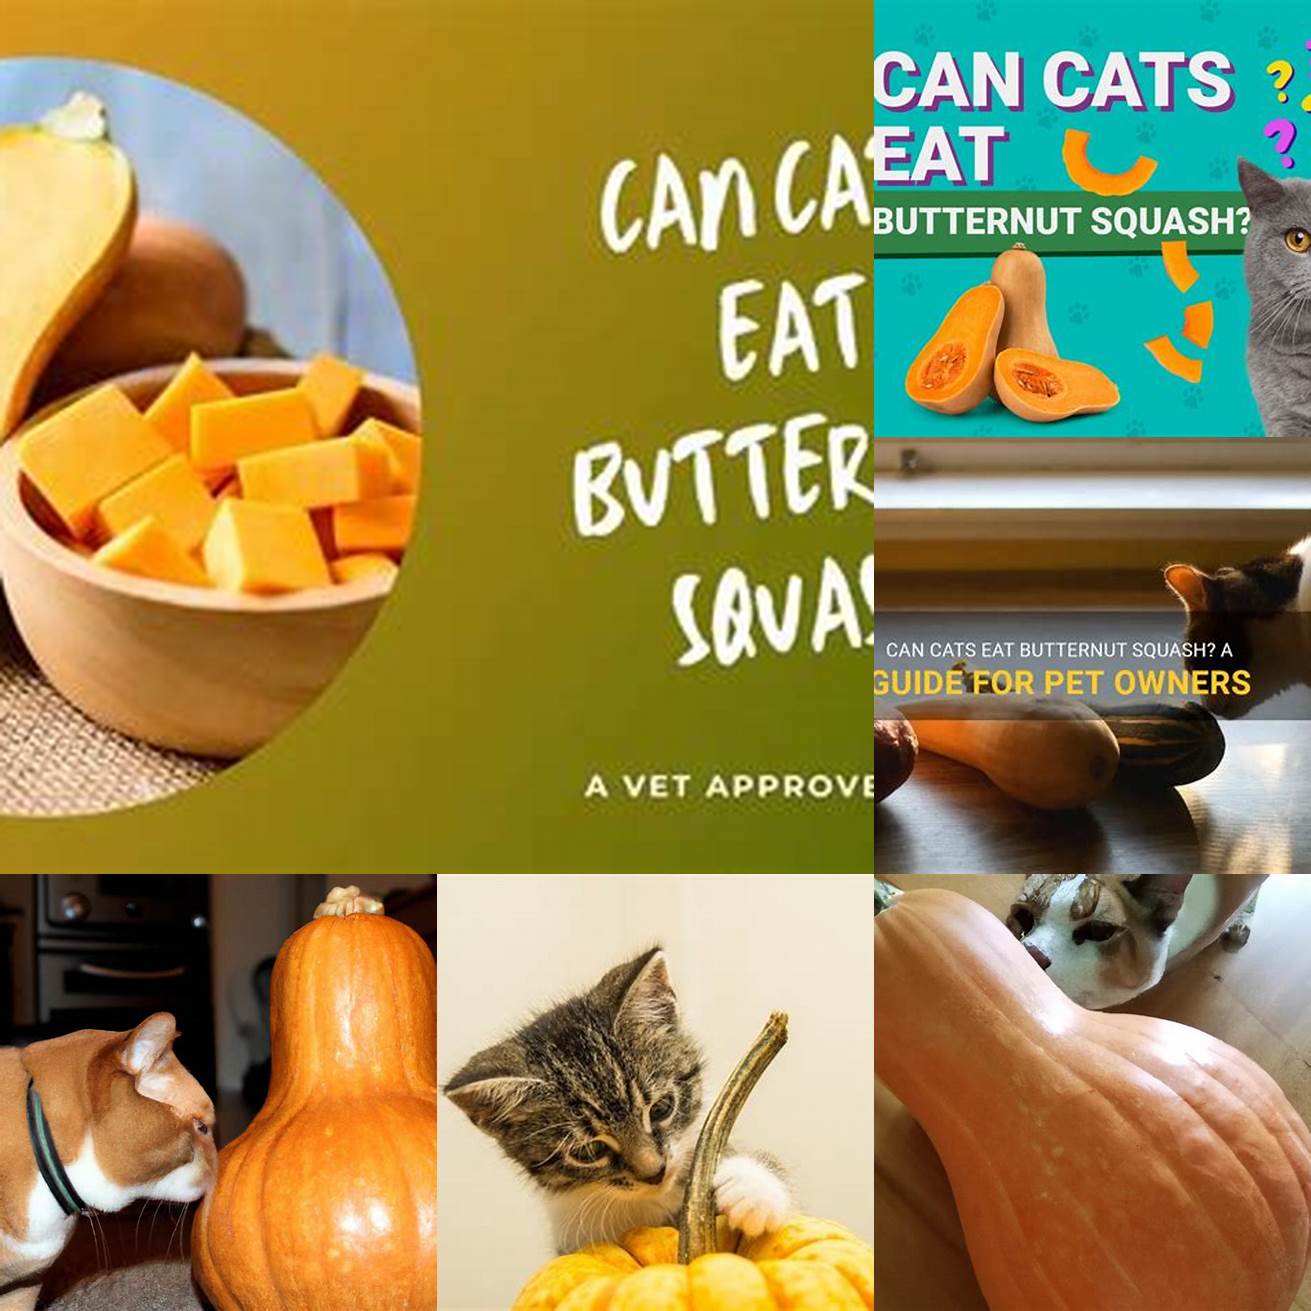 4 How should butternut squash be prepared for cats